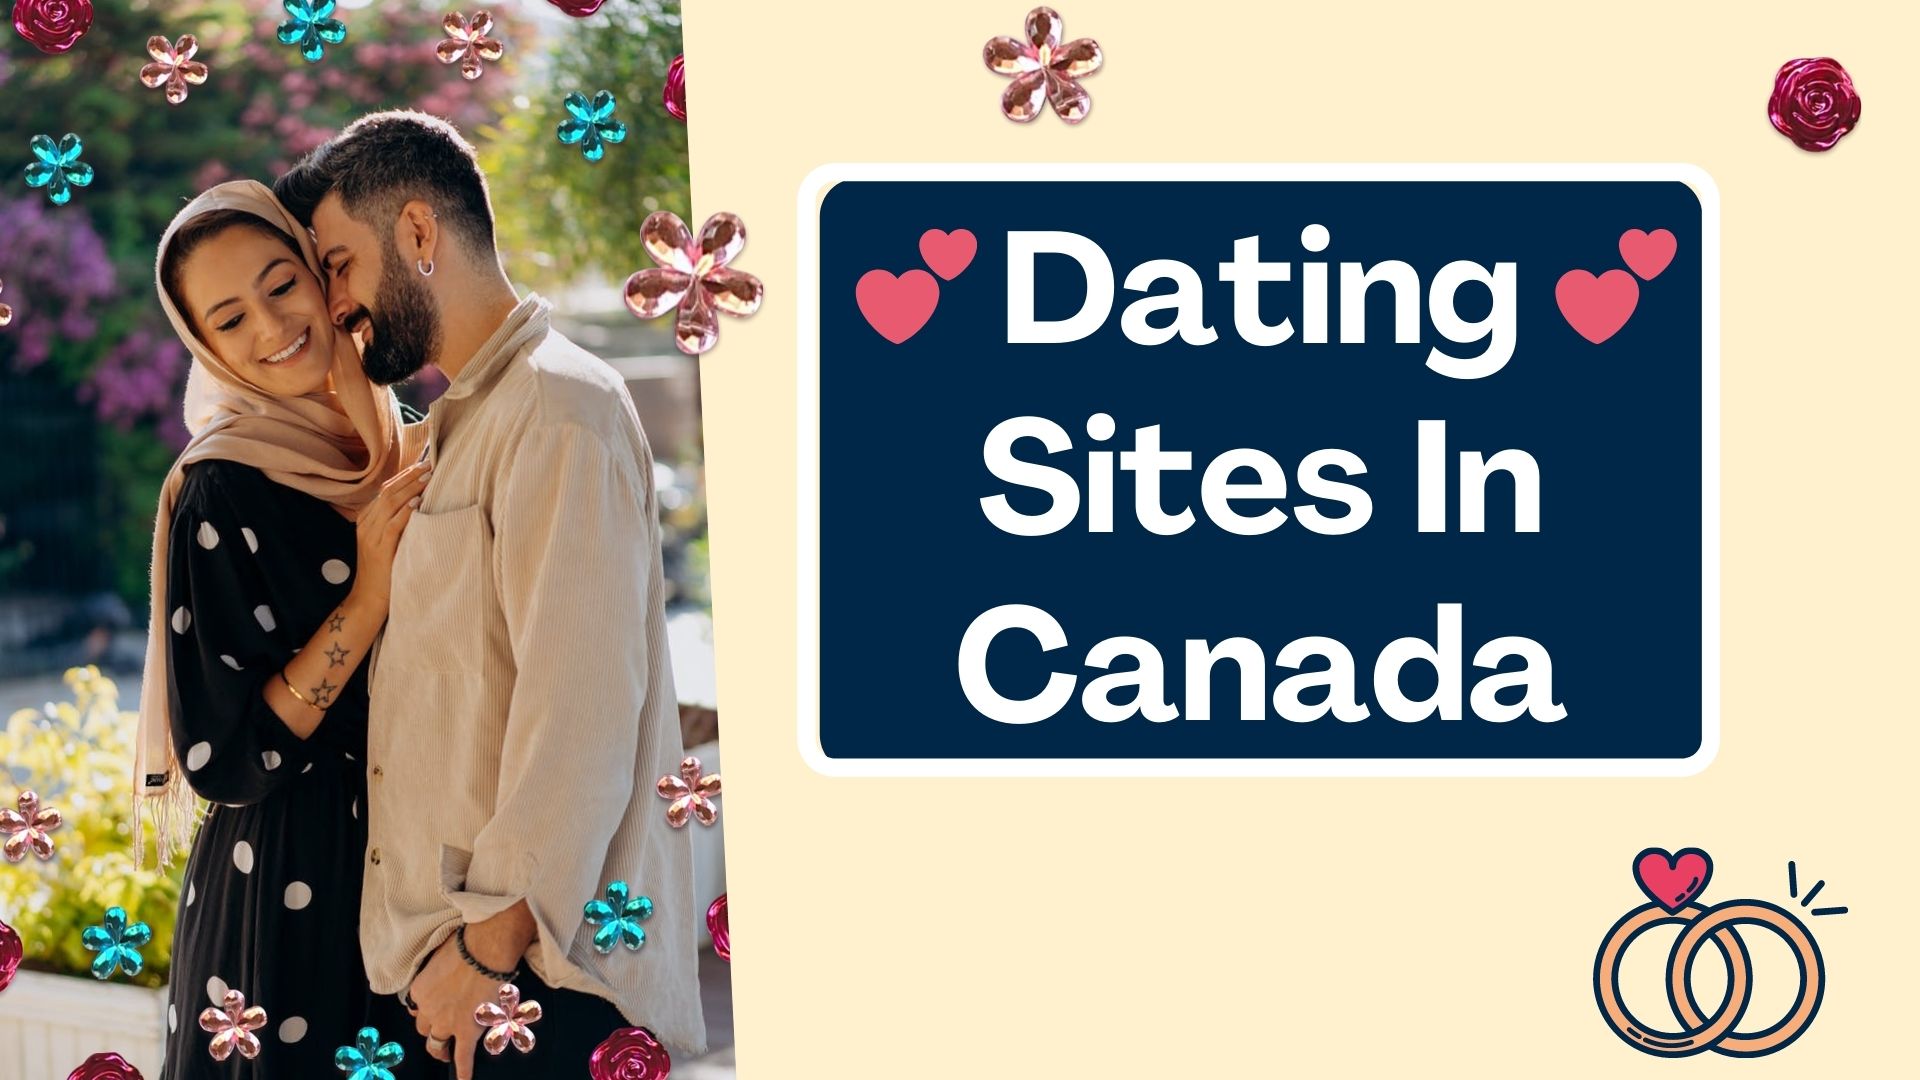 Top 8 Best Herpes Dating Sites & Apps for HSV Singles